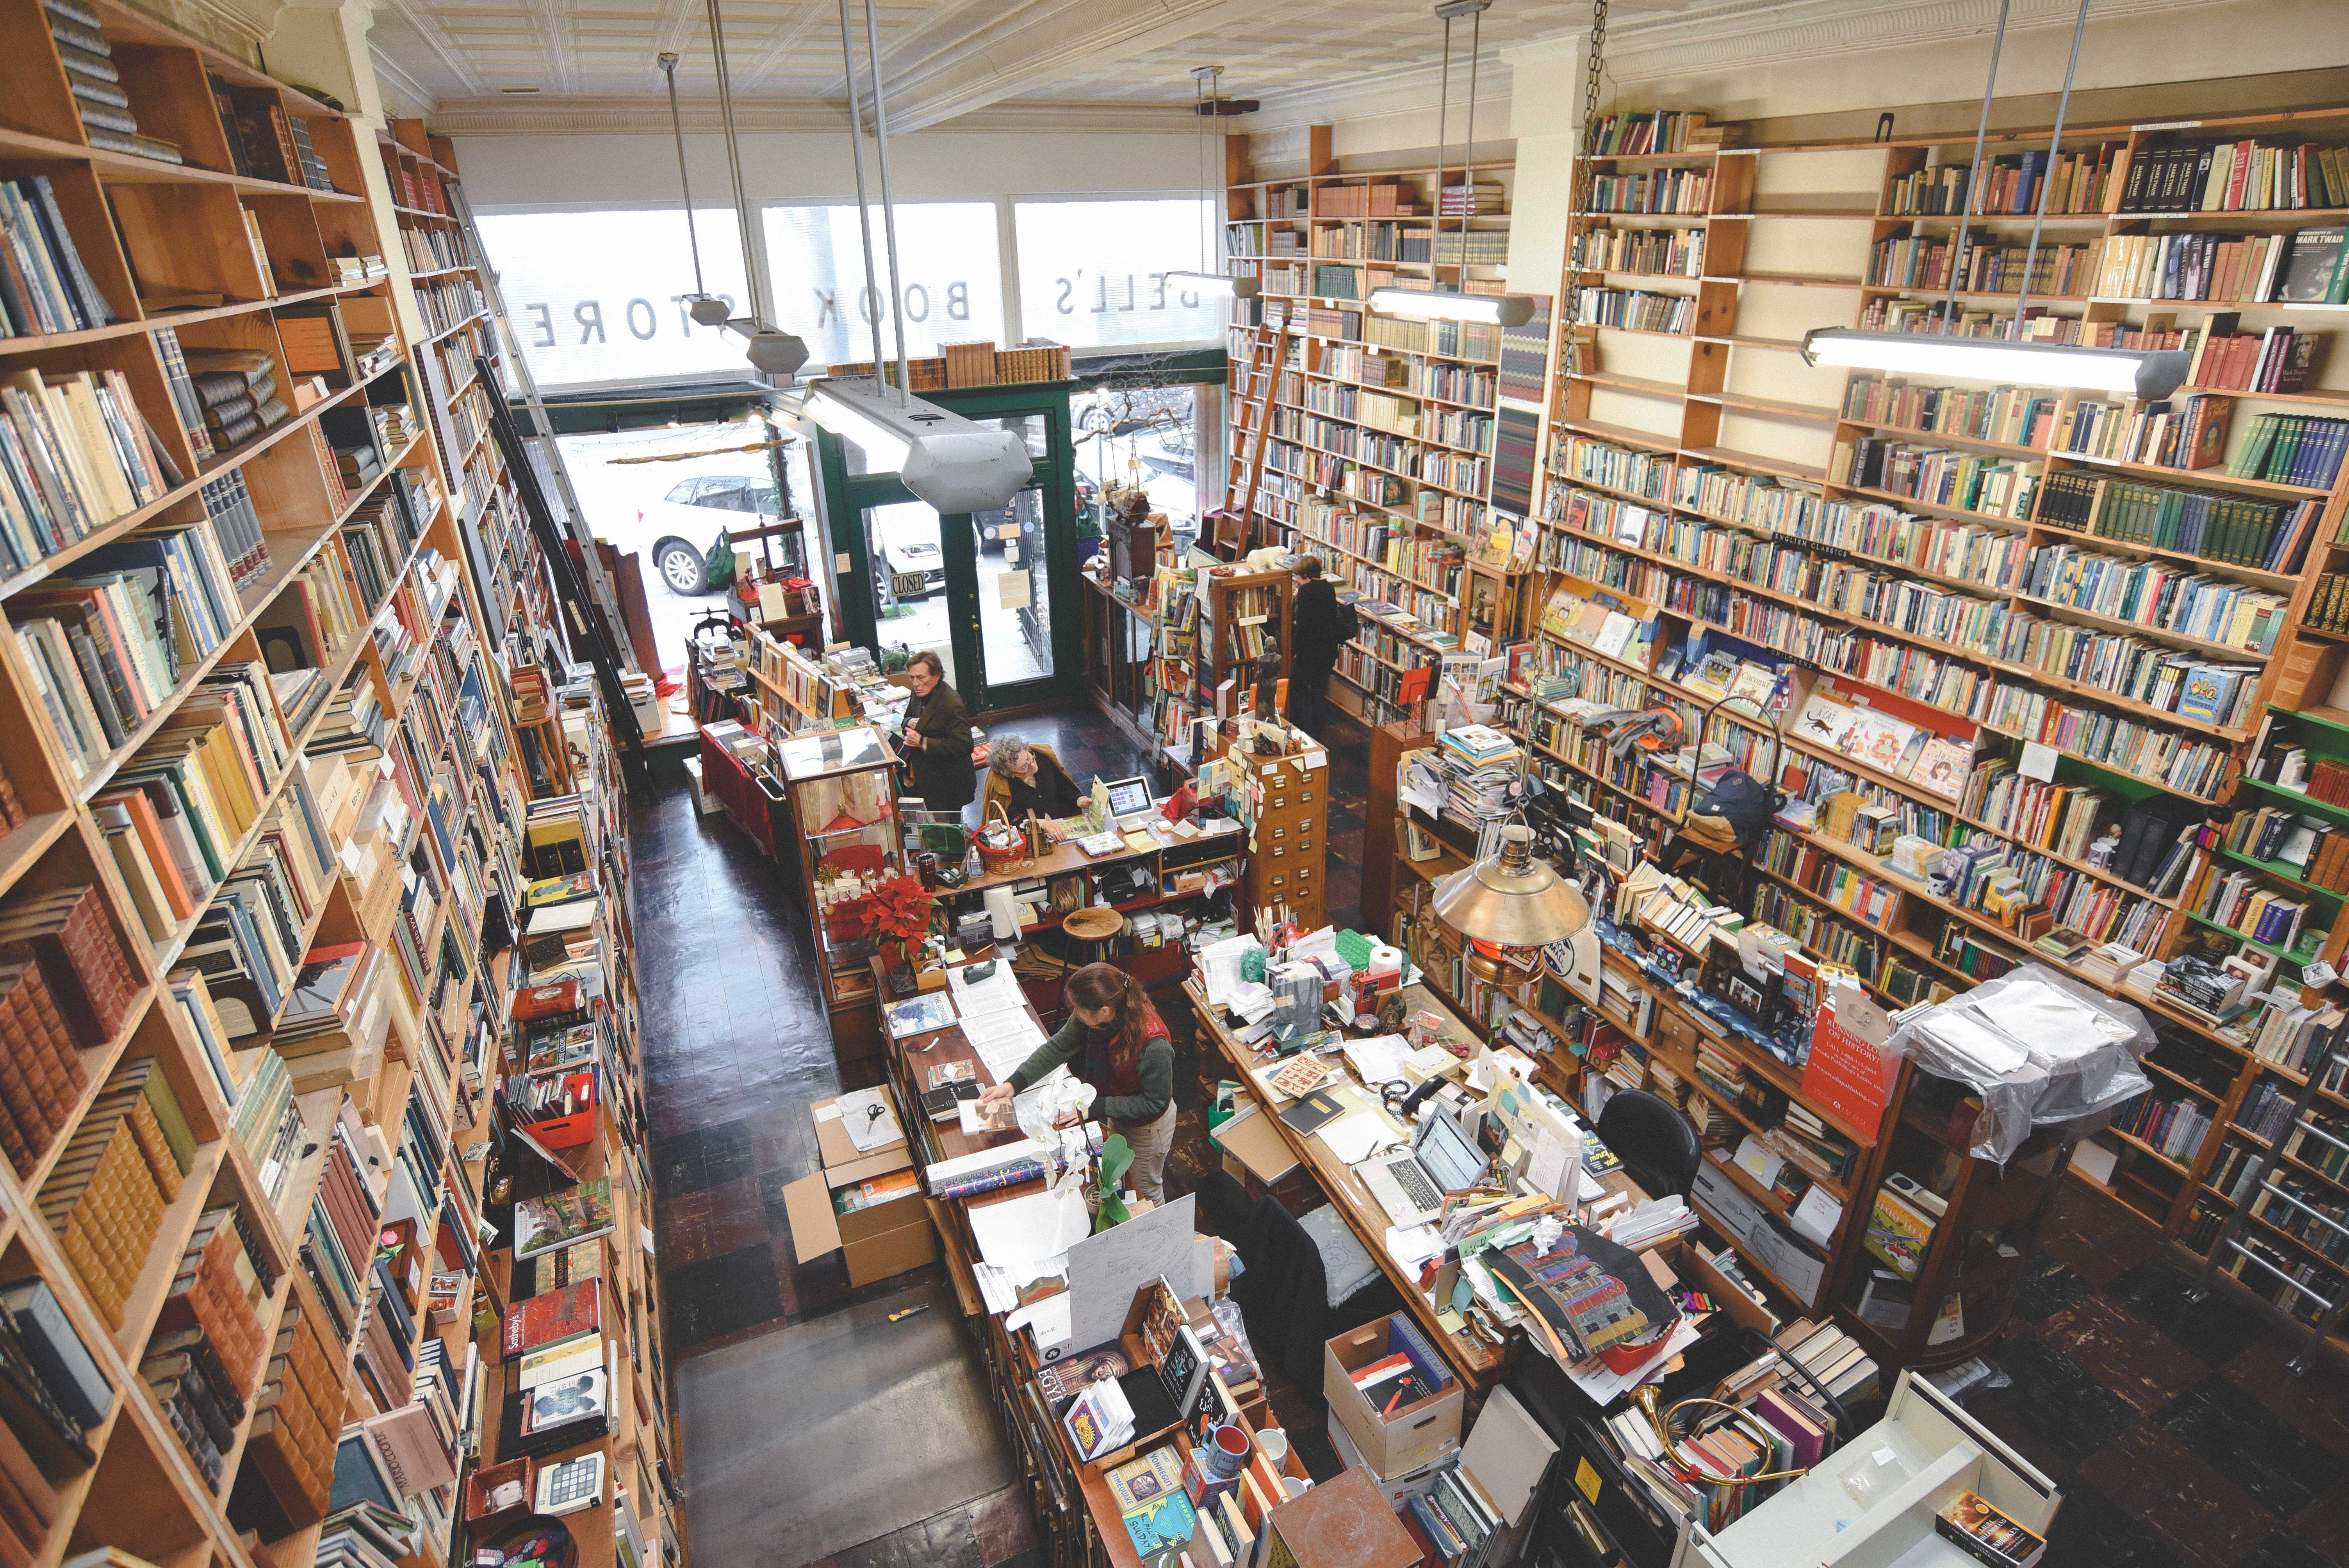 A balcony shot captures the scenery of the bookstore below. Photo by James Poe.